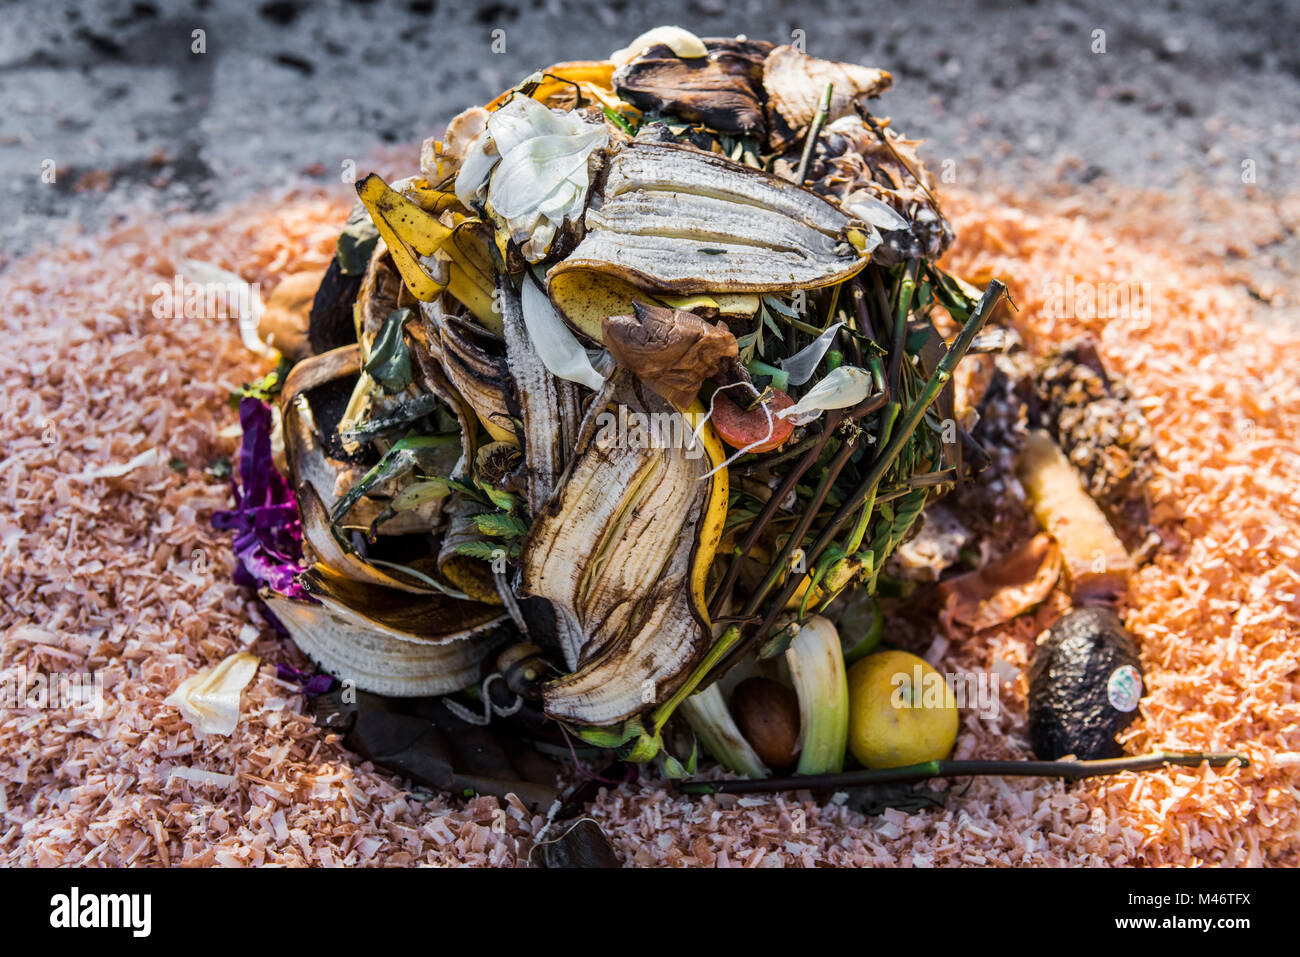 Kitchen scraps mixed with wood shavings. Stock Photo